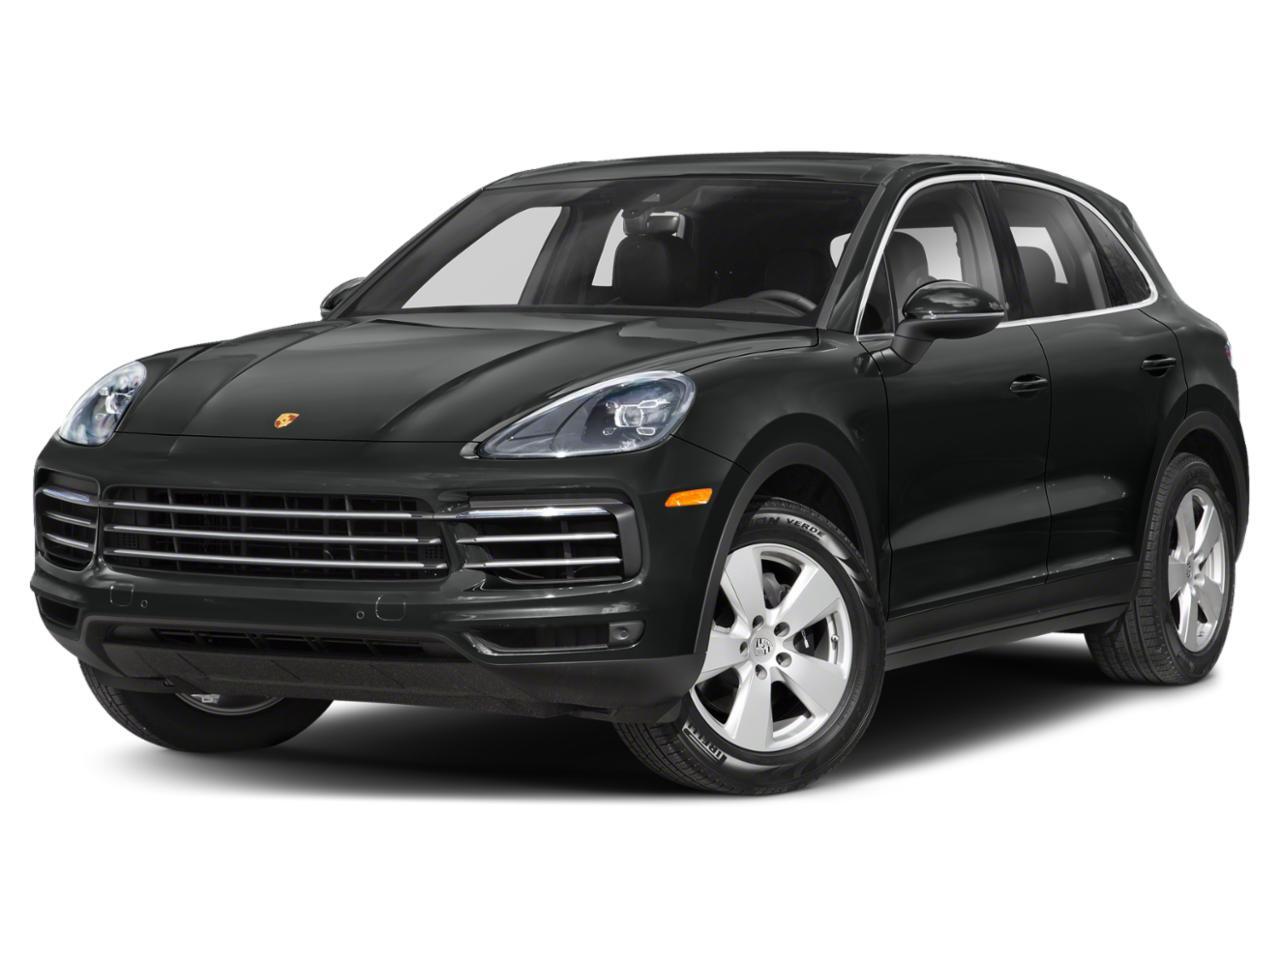 2019 Porsche Cayenne | 2 Year Extended Warranty Included | Loaded